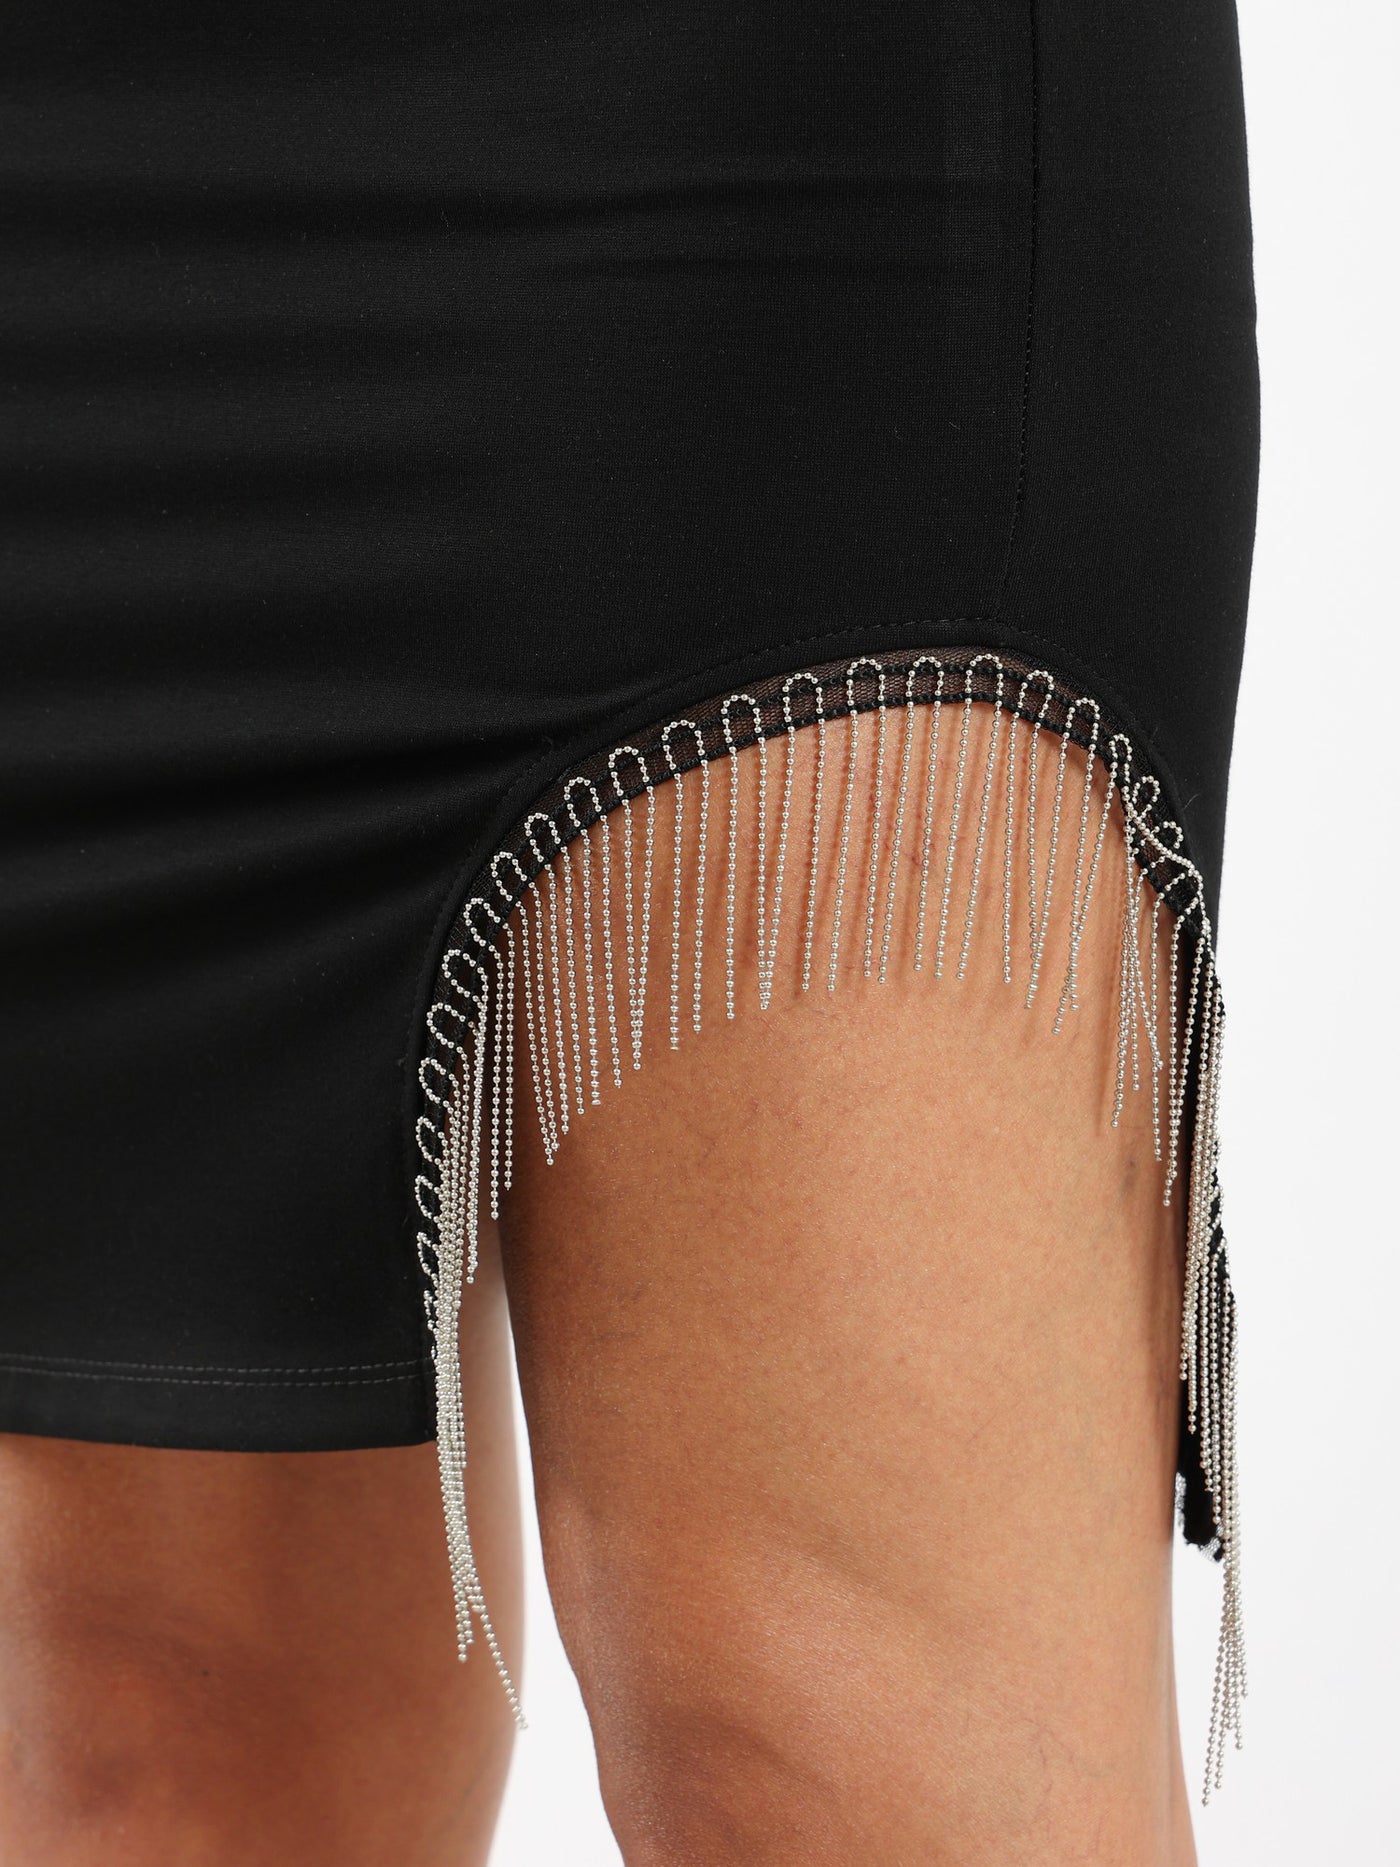 Bodycon Skirt - Mini Length - Cut-Out with Diamante Fringe